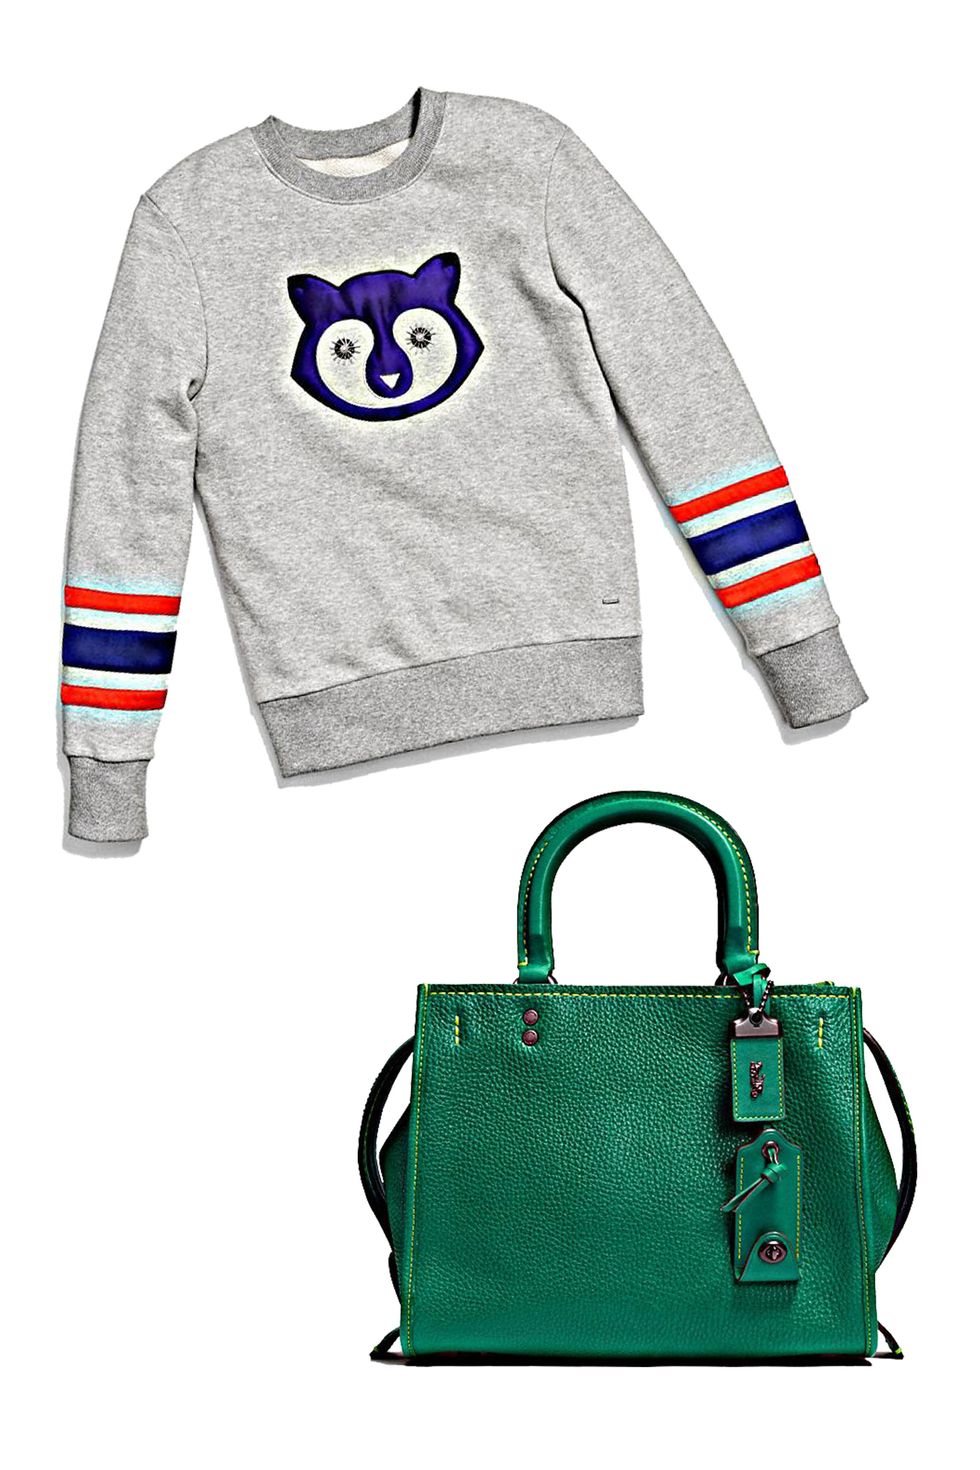 <p>Think: time-honored silhouettes in collegiate-inspired solid colors, like this kelly-green satchel paired with a charming striped-sleeve sweatshirt—all of these pieces will work great with your favorite loafers and khakis!
</p><p><br>
</p><p><em data-redactor-tag="em">Coach 1941 Embellished Raccoon Sweatshirt, $395, <a rel="noskim" href="http://www.coach.com/coach-designer-tops-embellished-raccoon-sweatshirt/56478.html?CID=D_B_HBZ_11843" target="_blank">coach.com</a>; Coach 1941 Rogue Bag 25&nbsp;in Glovetanned Pebble Leather, $595, <a rel="noskim" href="http://www.coach.com/rogue-bag-25-in-glovetanned-pebble-leather/54536.html?dwvar_color=BPL4A&amp;CID=D_B_HBZ_11882" target="_blank">coach.com</a></em><span class="redactor-invisible-space" data-verified="redactor" data-redactor-tag="span" data-redactor-class="redactor-invisible-space"><em data-redactor-tag="em"></em></span><br></p>